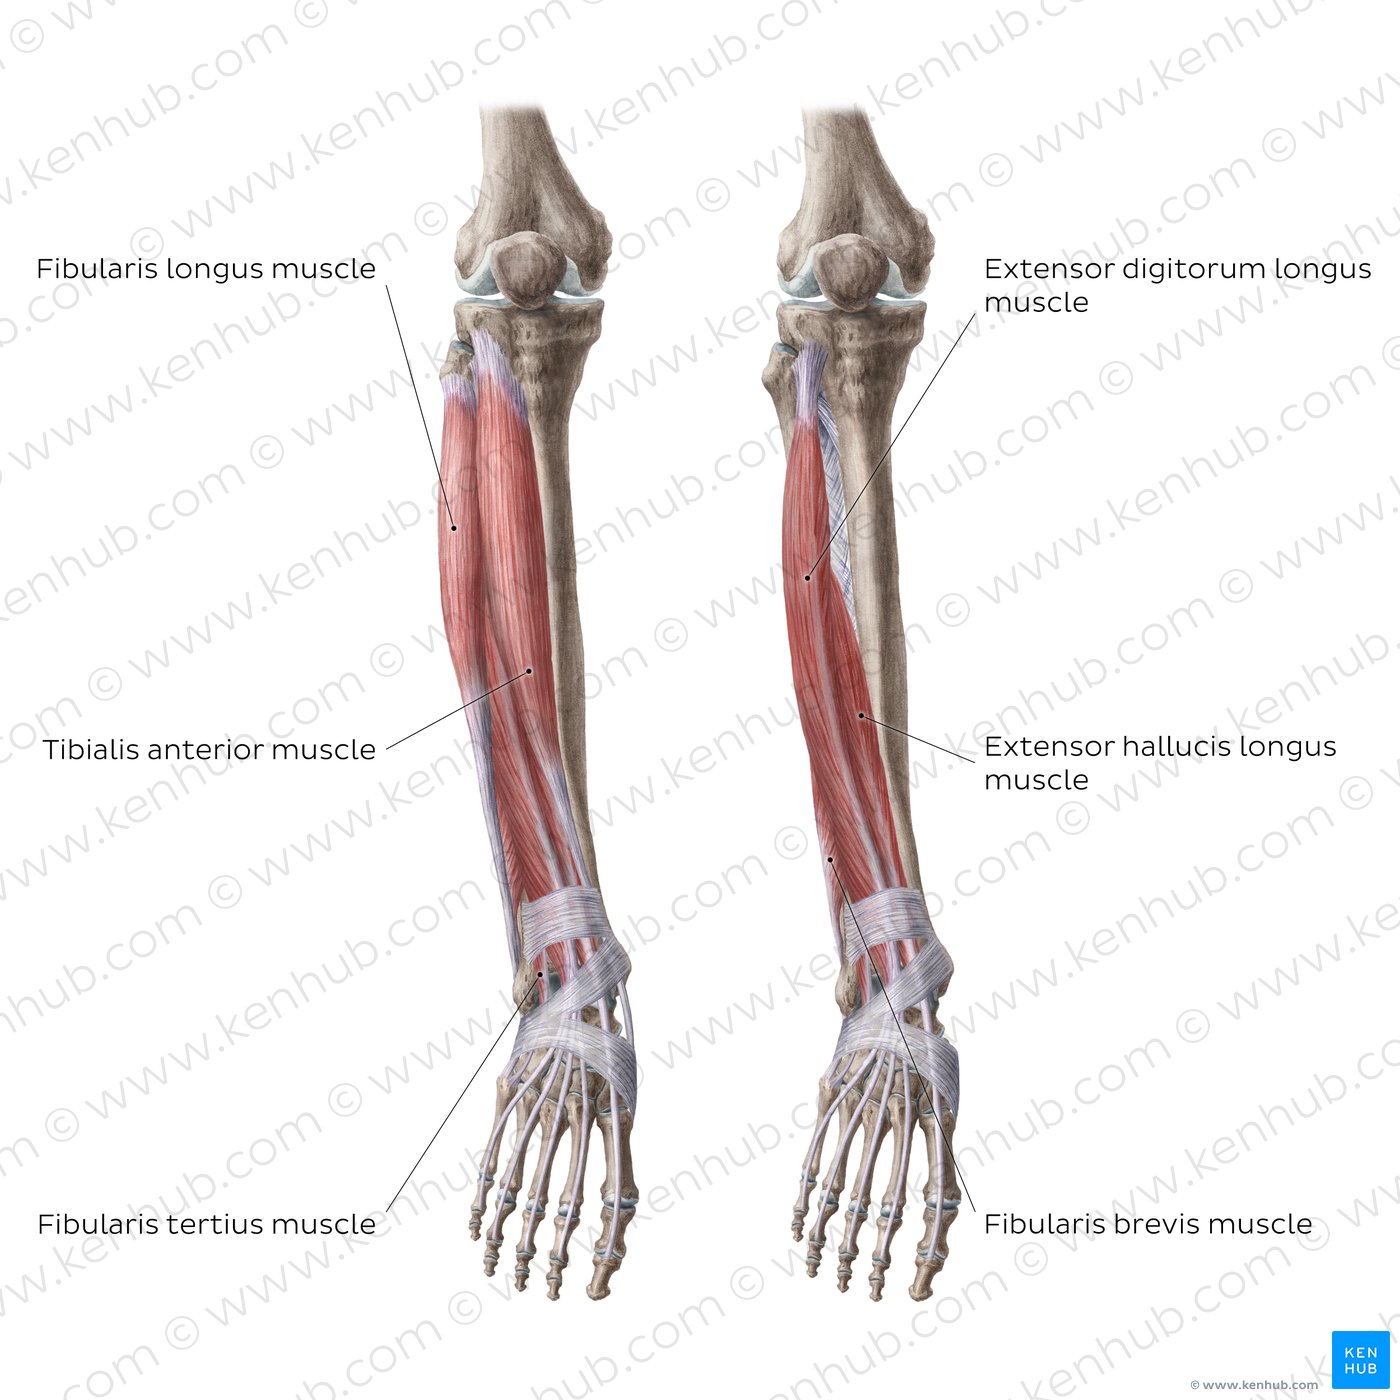 Muscles of the leg (Anterior view)